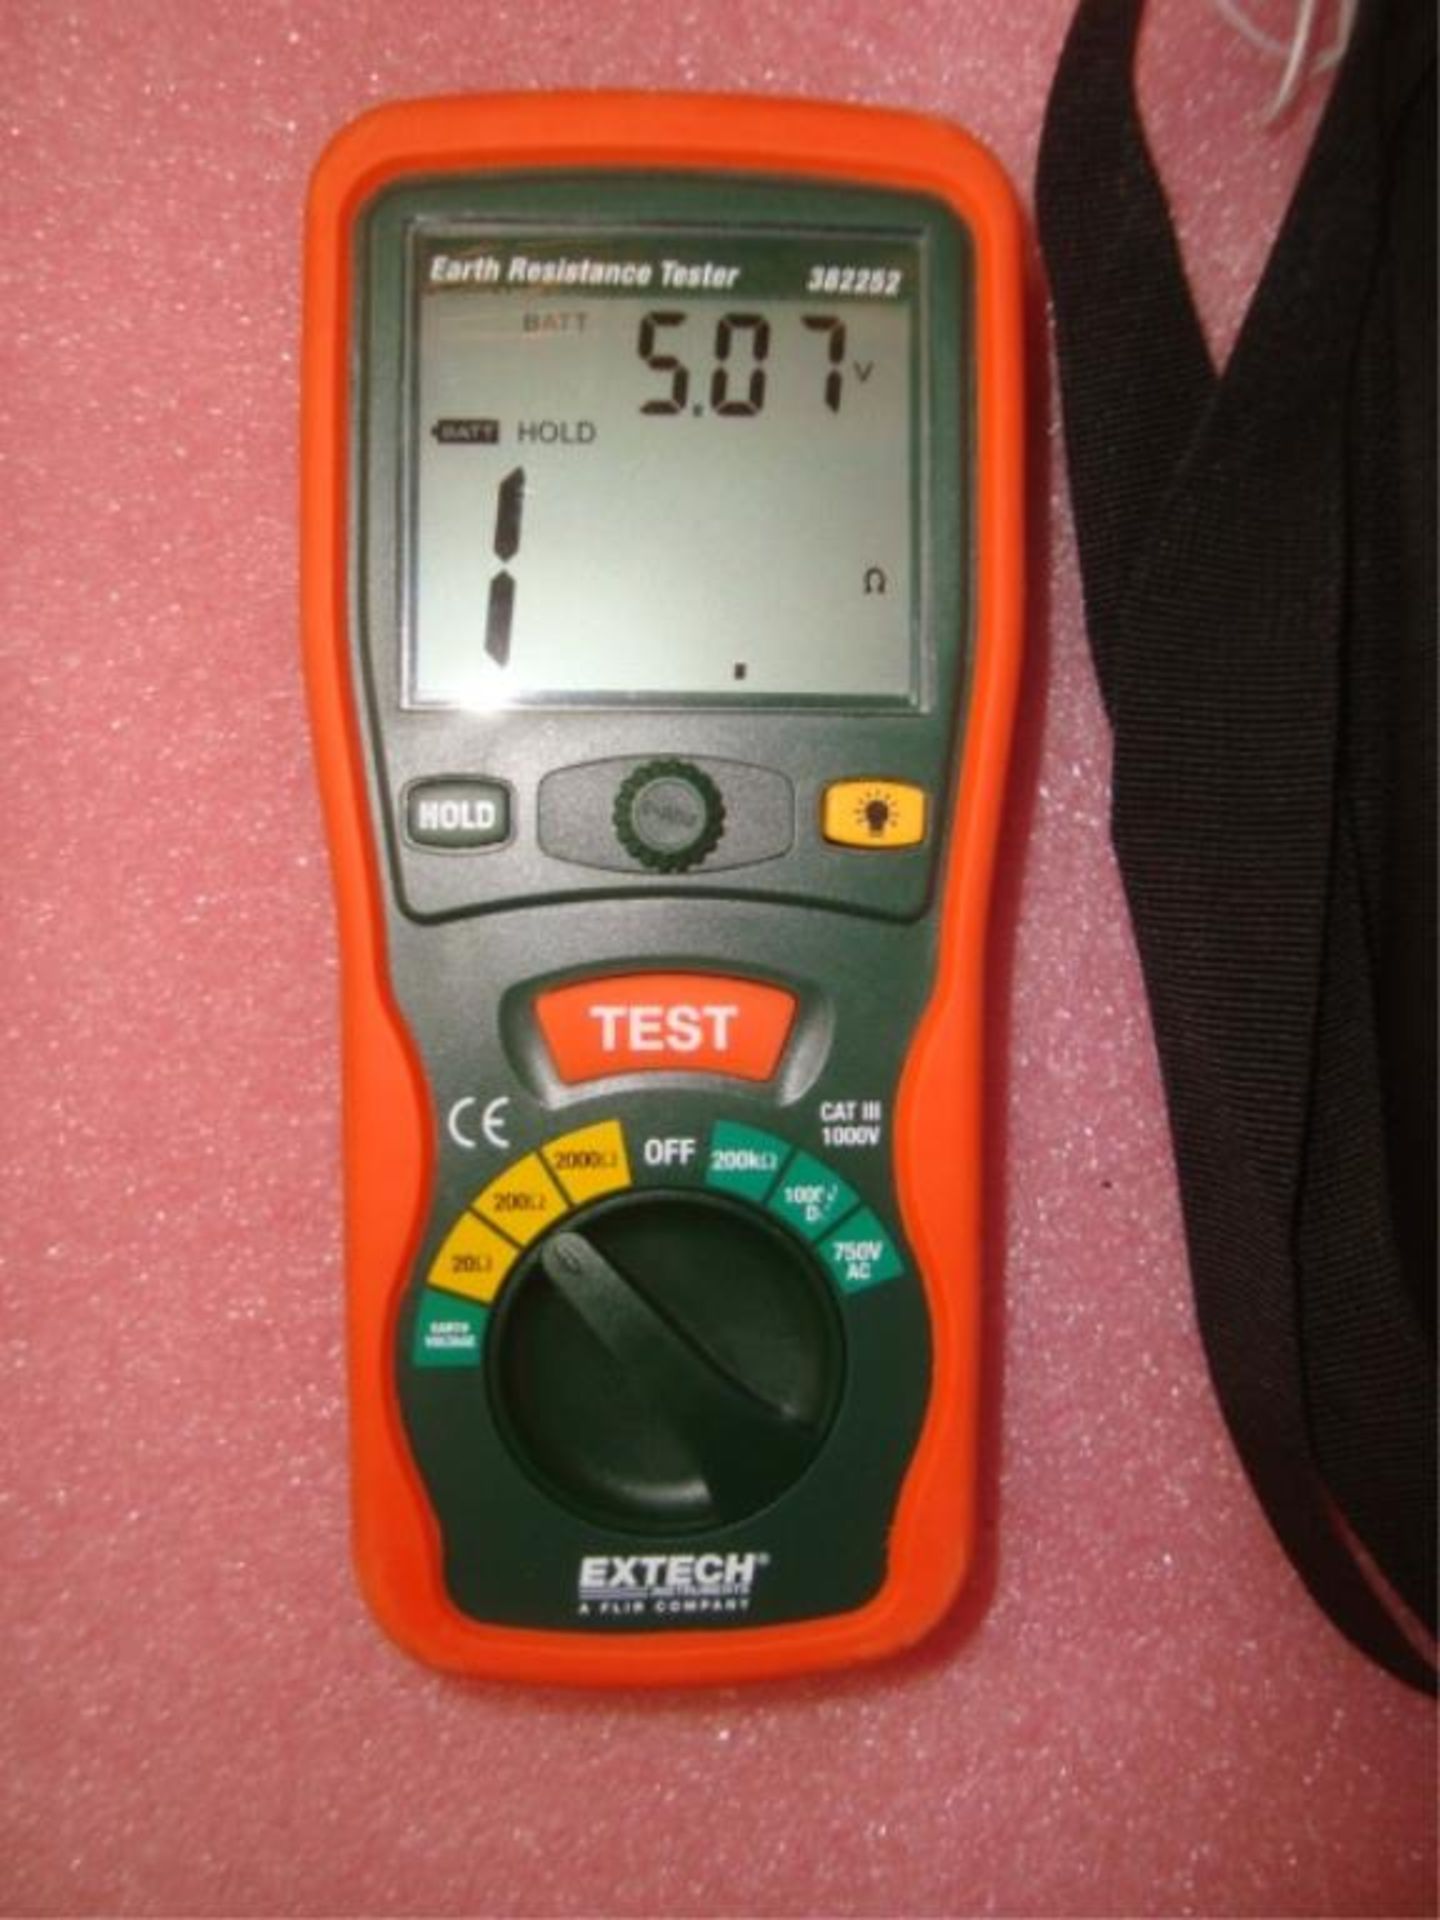 Earth Resistance Tester - Image 2 of 4